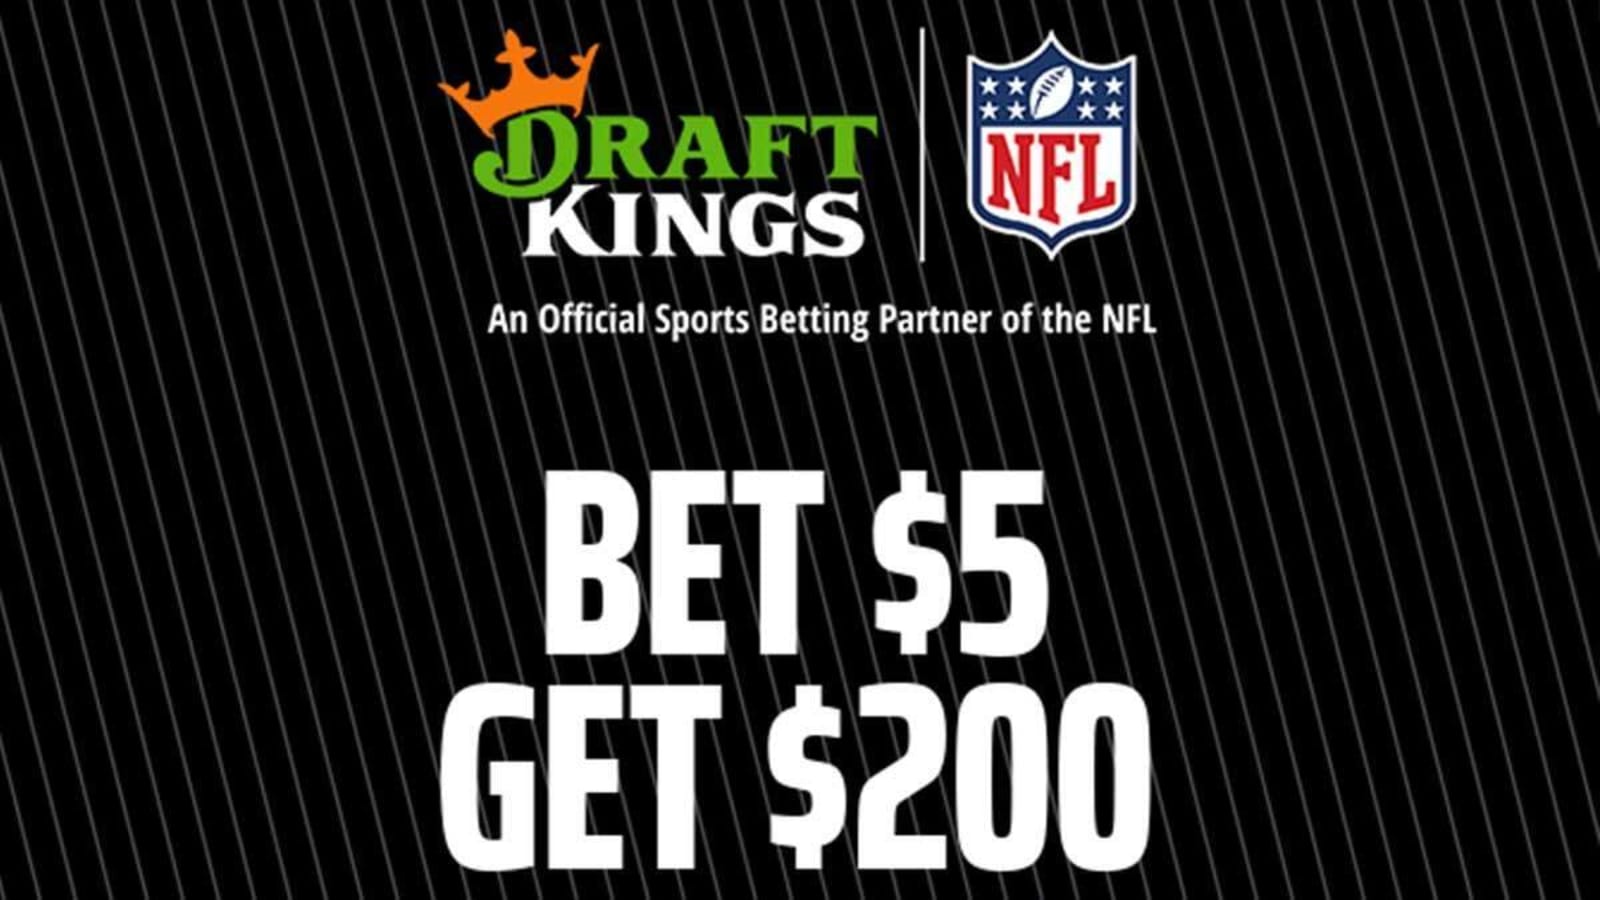 how to place a bet on draftkings